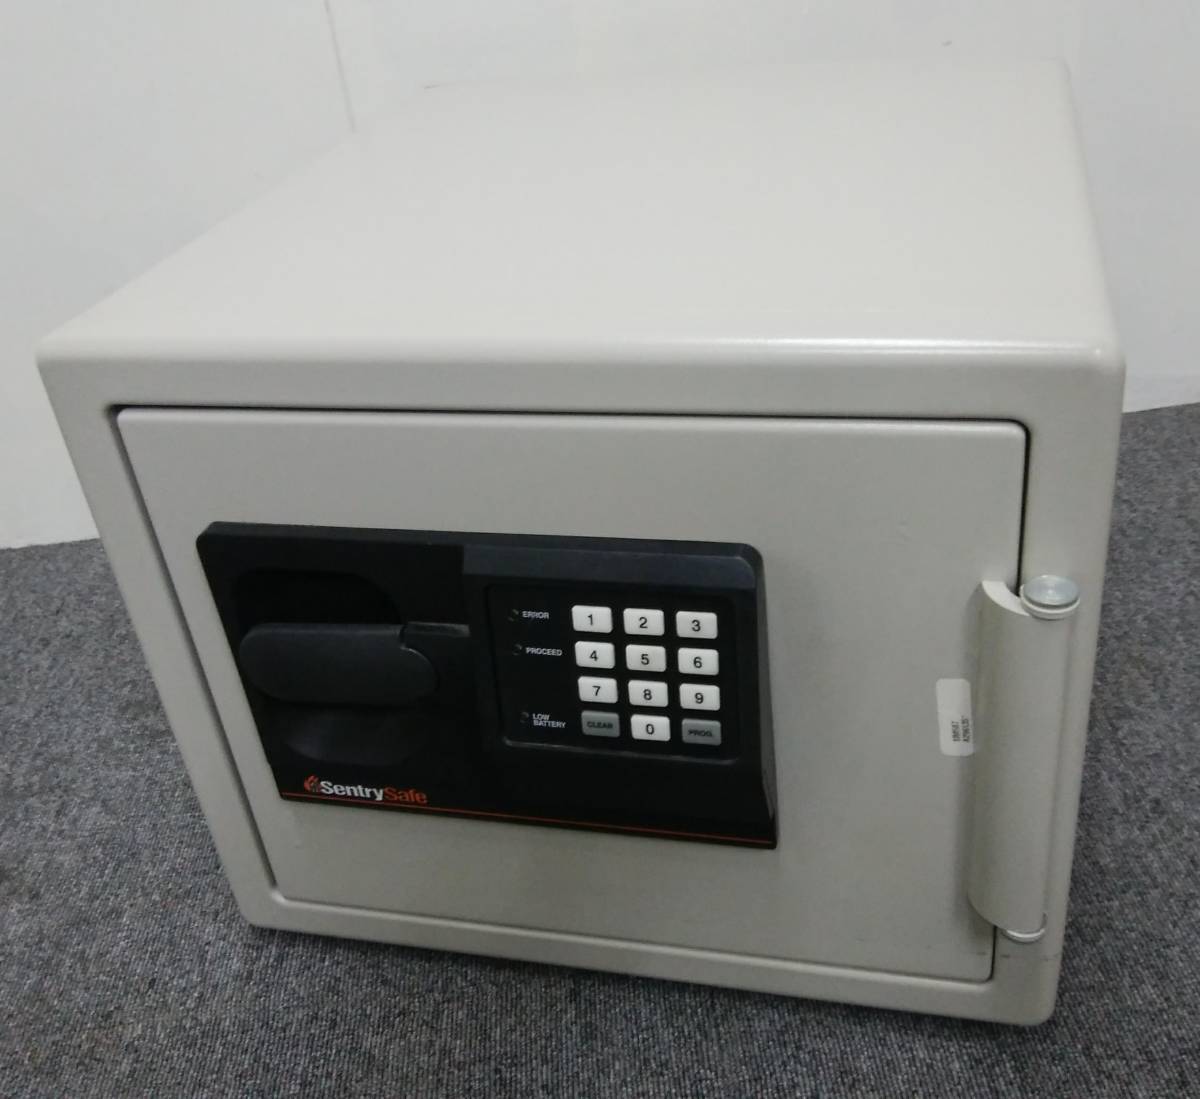  cent Lee fire-proof safe numeric keypad type SB0507 Sentry Safe receipt welcome 